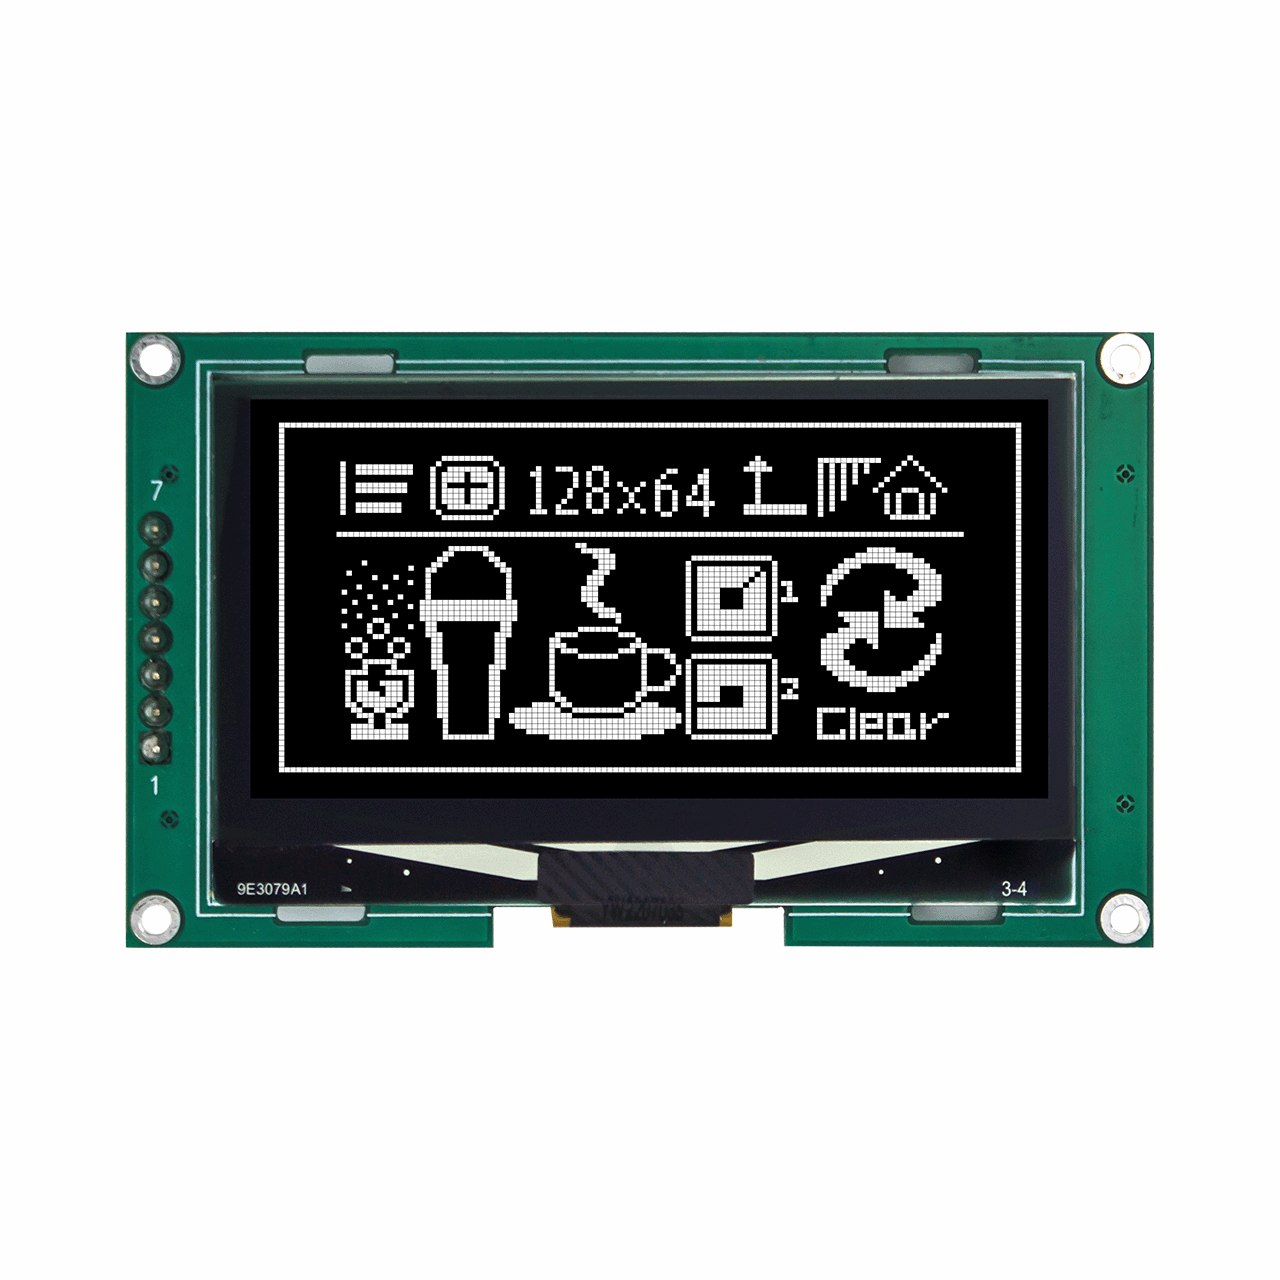 2.42 inch 128x64 White Graphic OLED Module MONO DISPLAY SSD1309